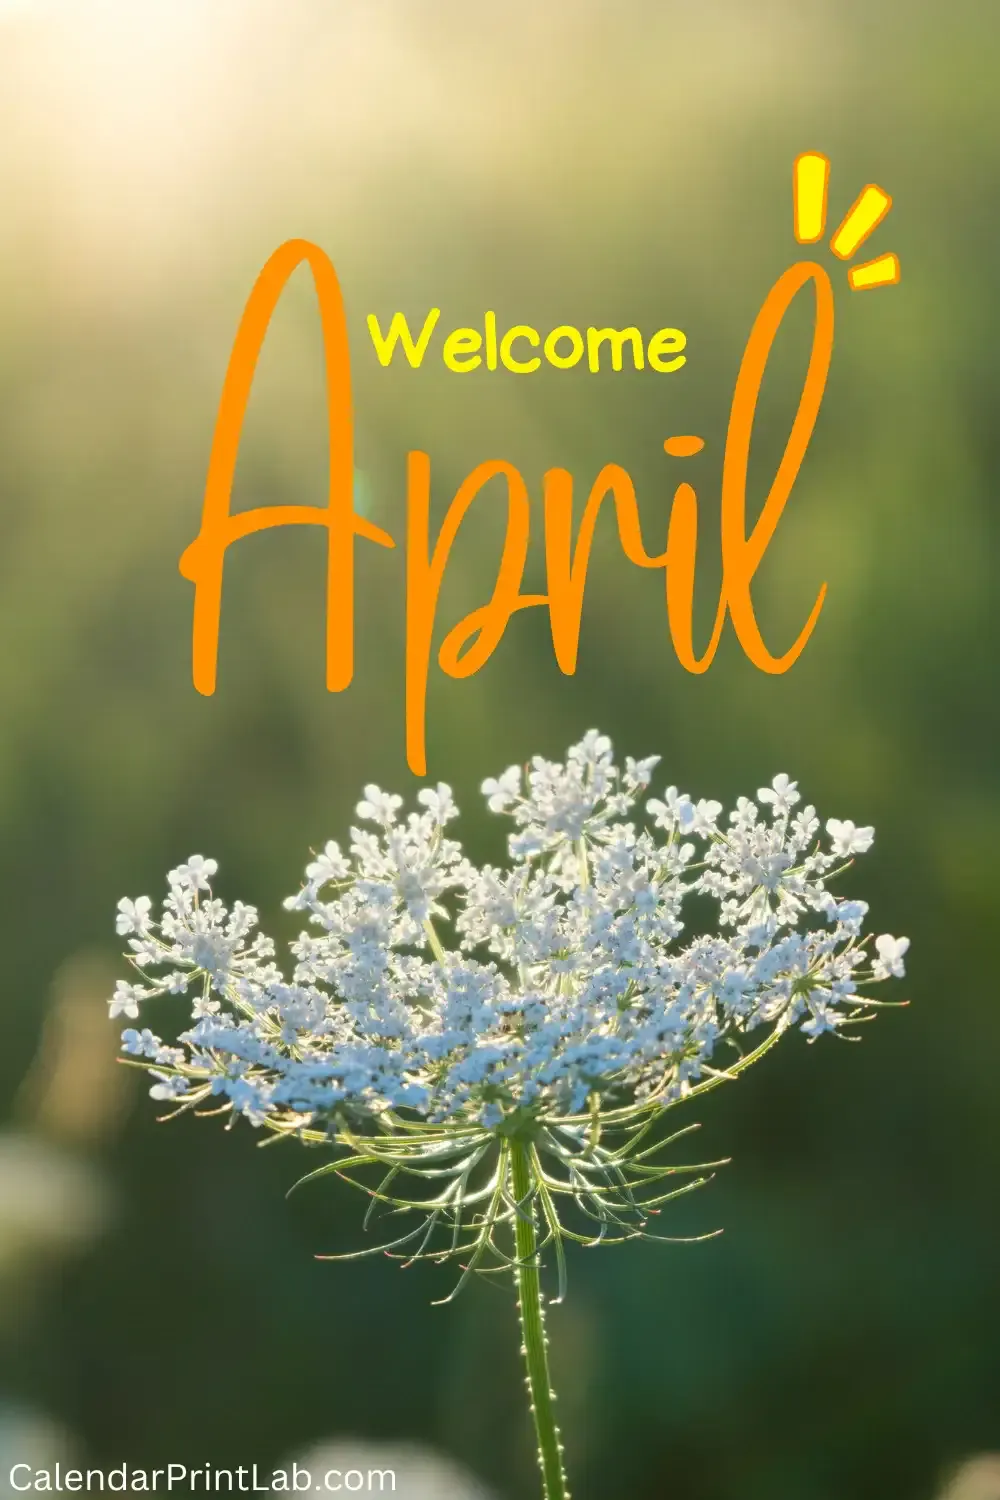 Welcome April Image Download